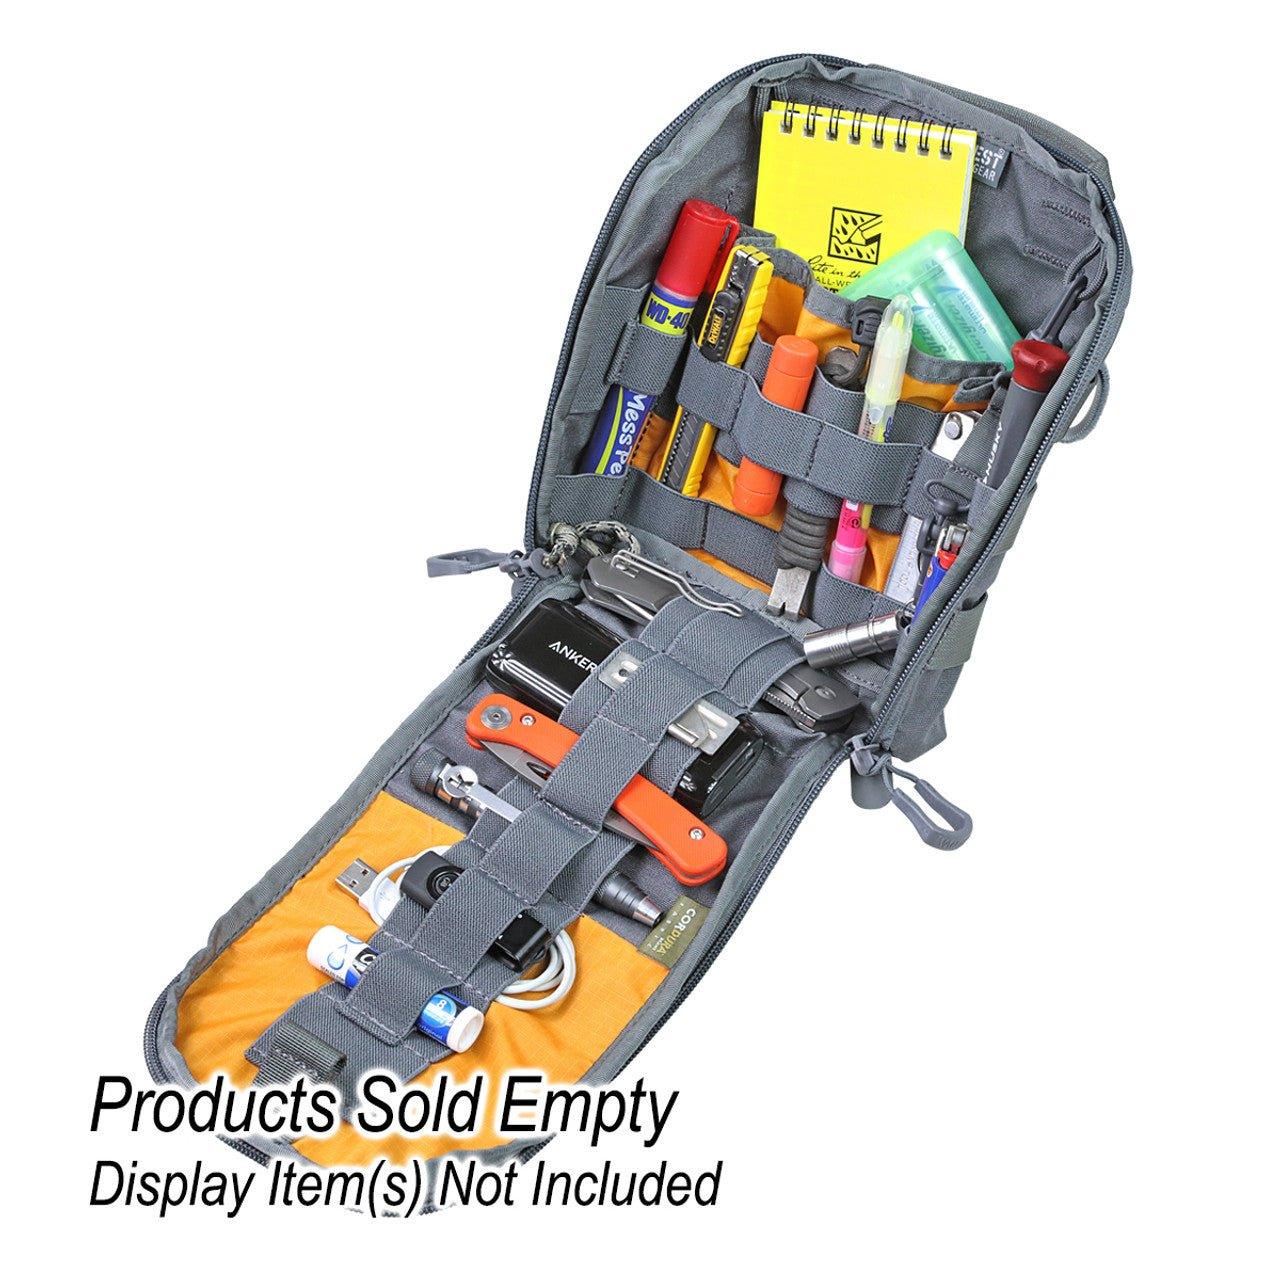 Vanquest FTIM 6X9 (Gen-2): Fast Totally Integrated Maximizer Pouch - Vendor